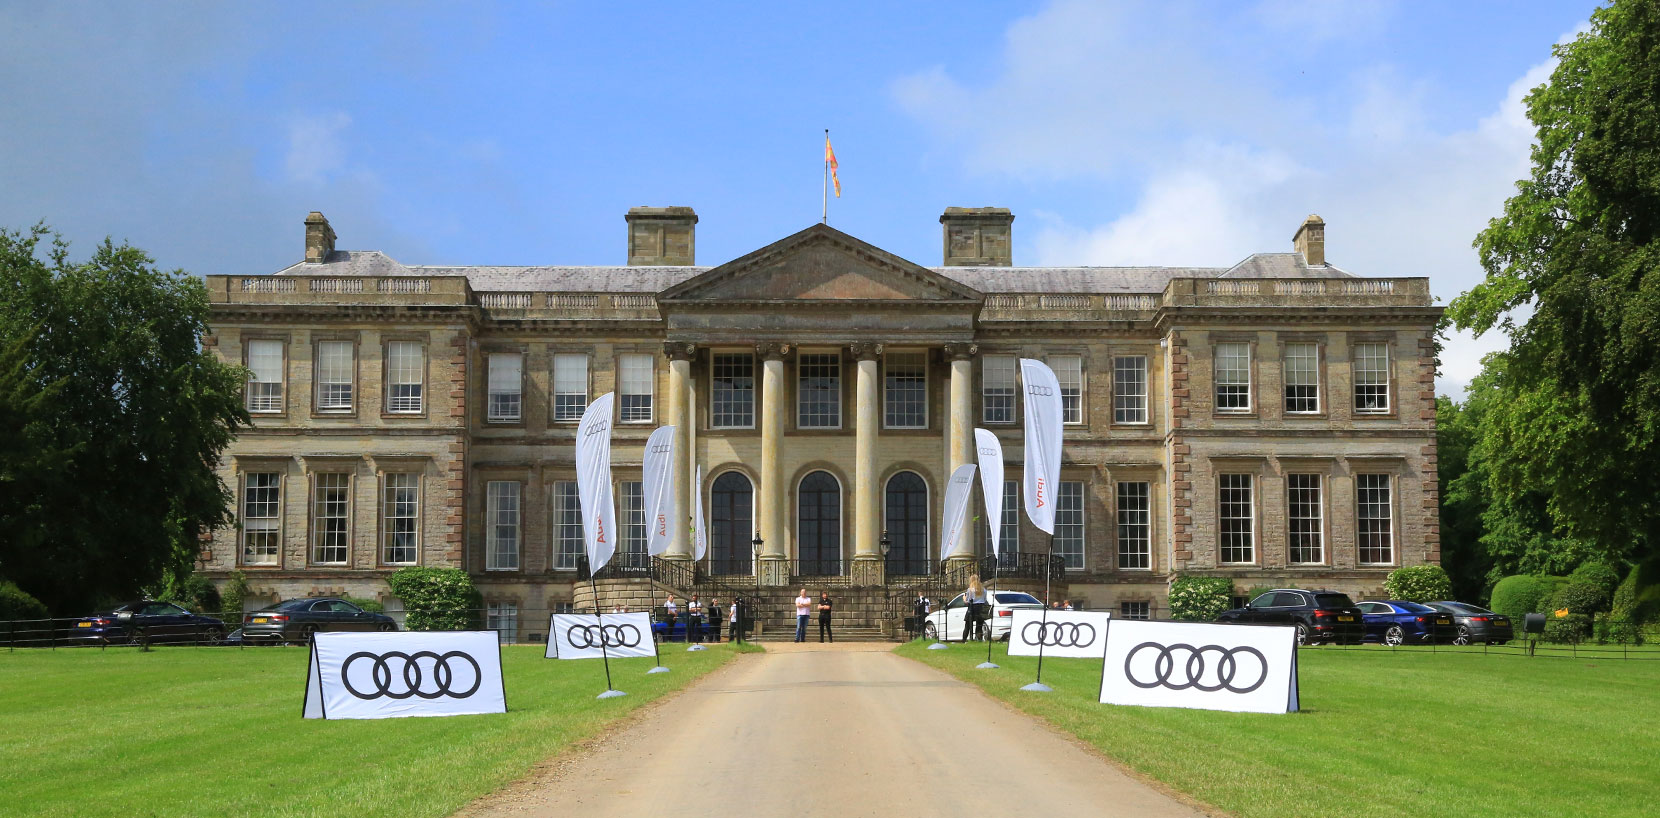 Audi product launch at Ragley